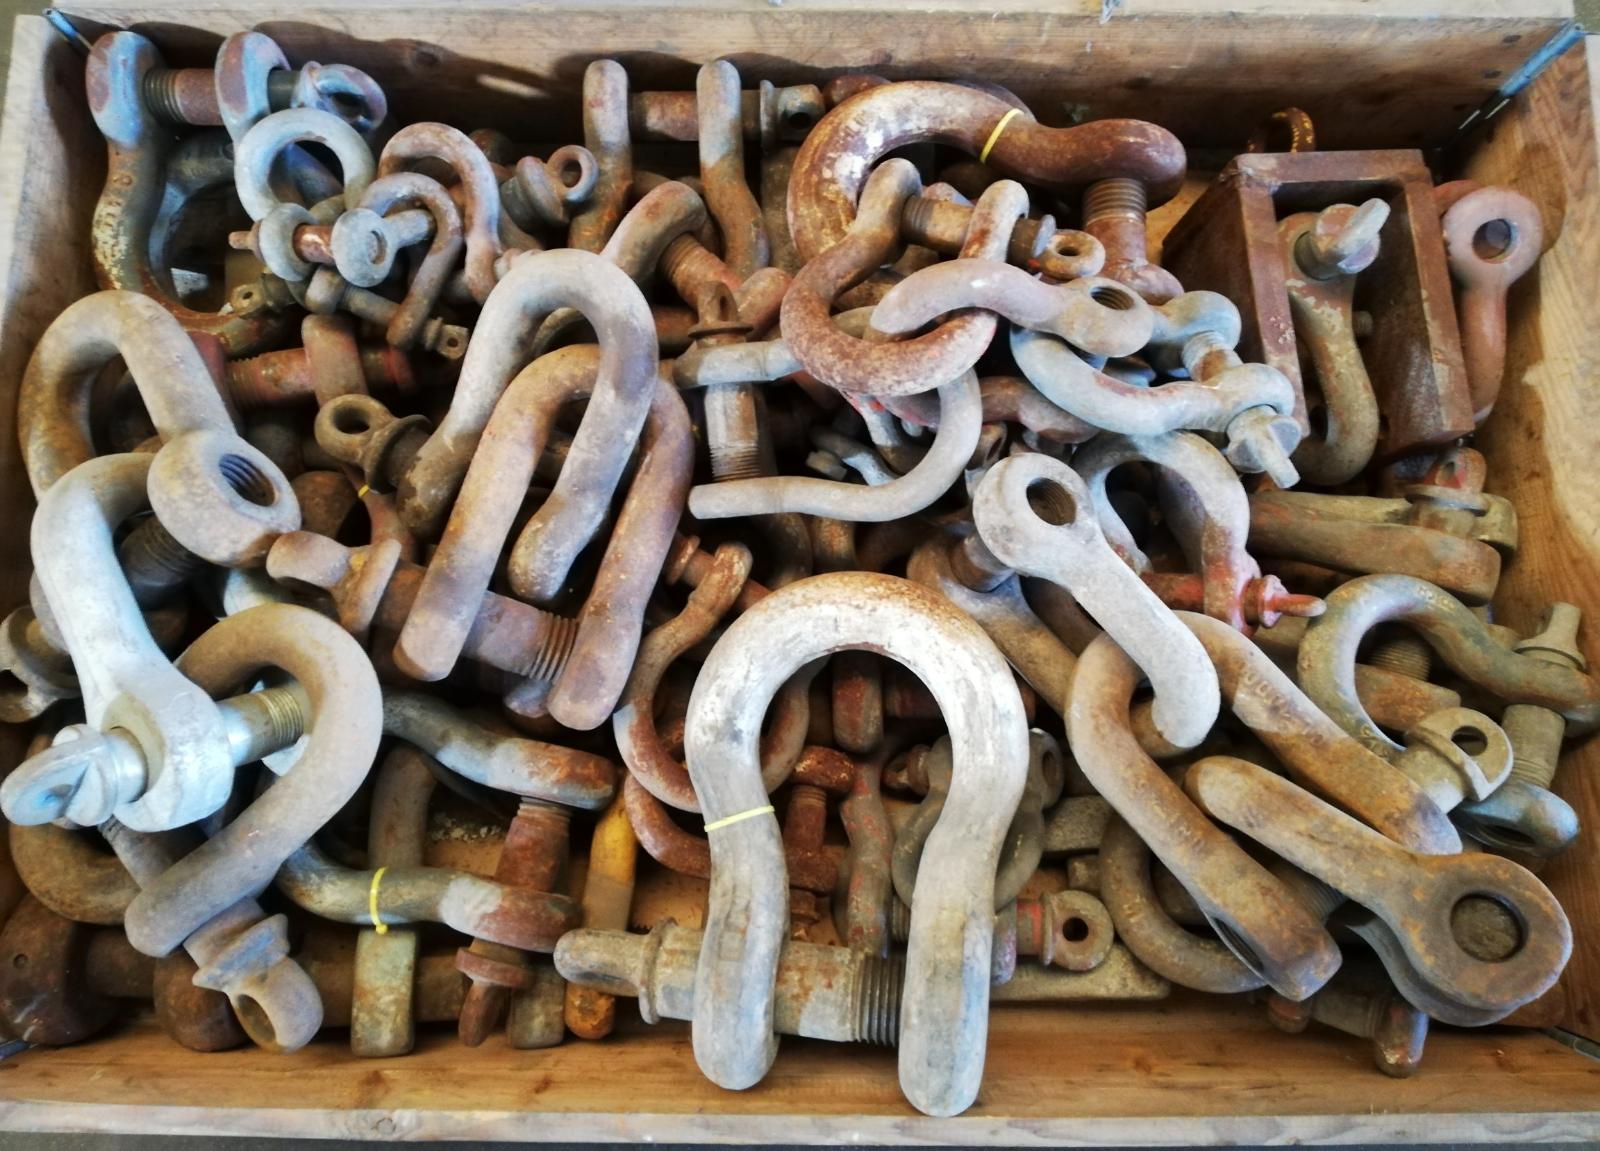  Rings and shackles of various sizes